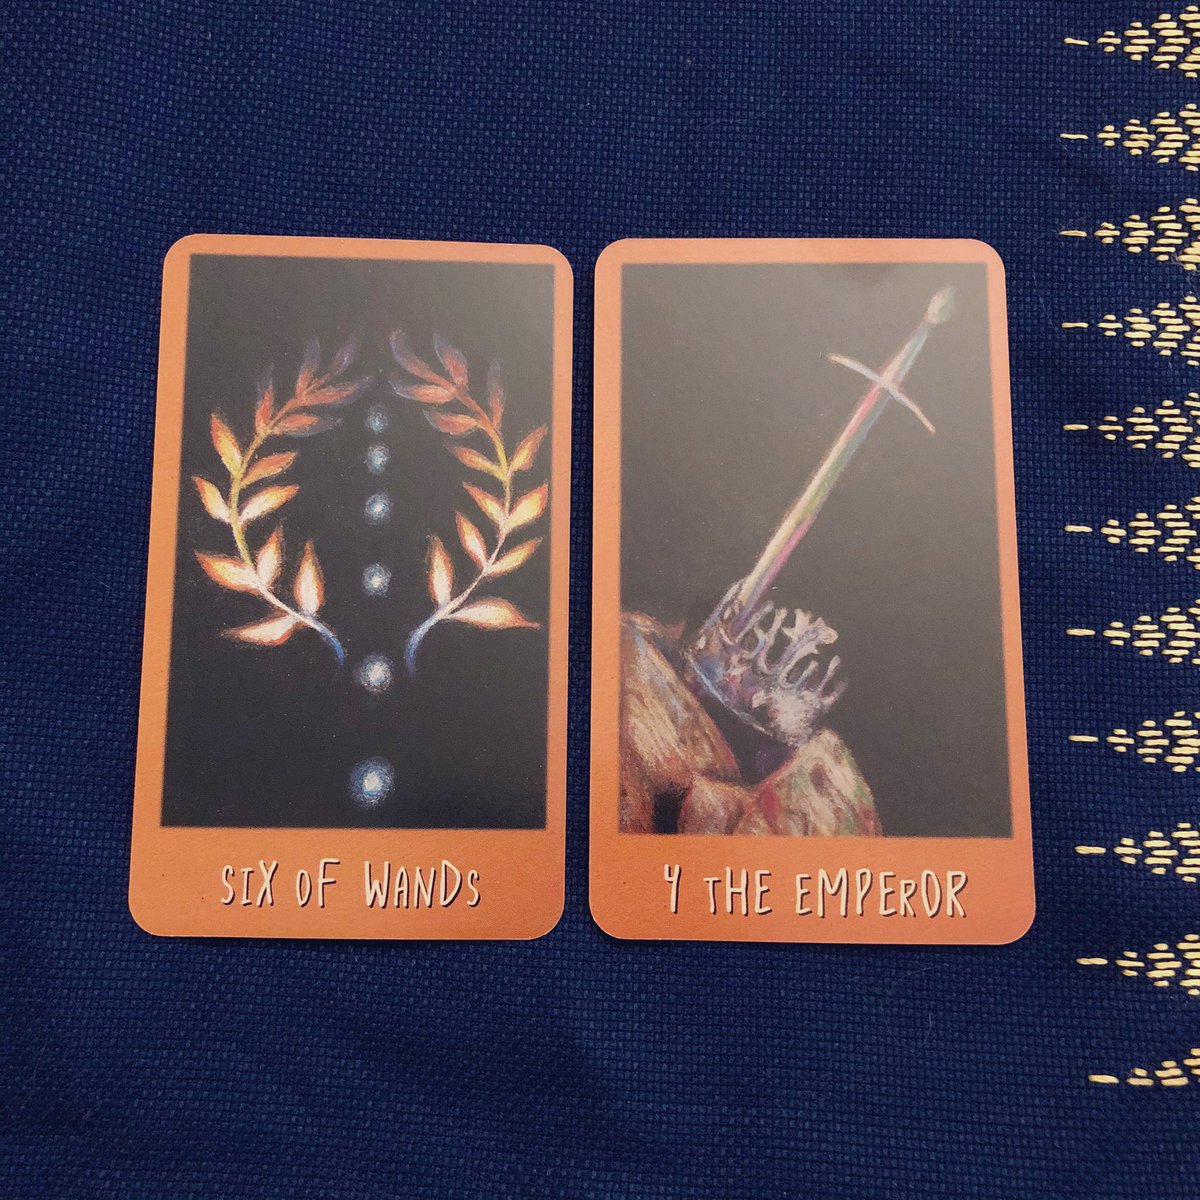 As I went to put the deck away, these two fell out as the clock struck midnight and the Solstice ended. I remember now how fiercely I am loved by the one who believes in everything I have always been and will still become. This is a beginning, not an end.